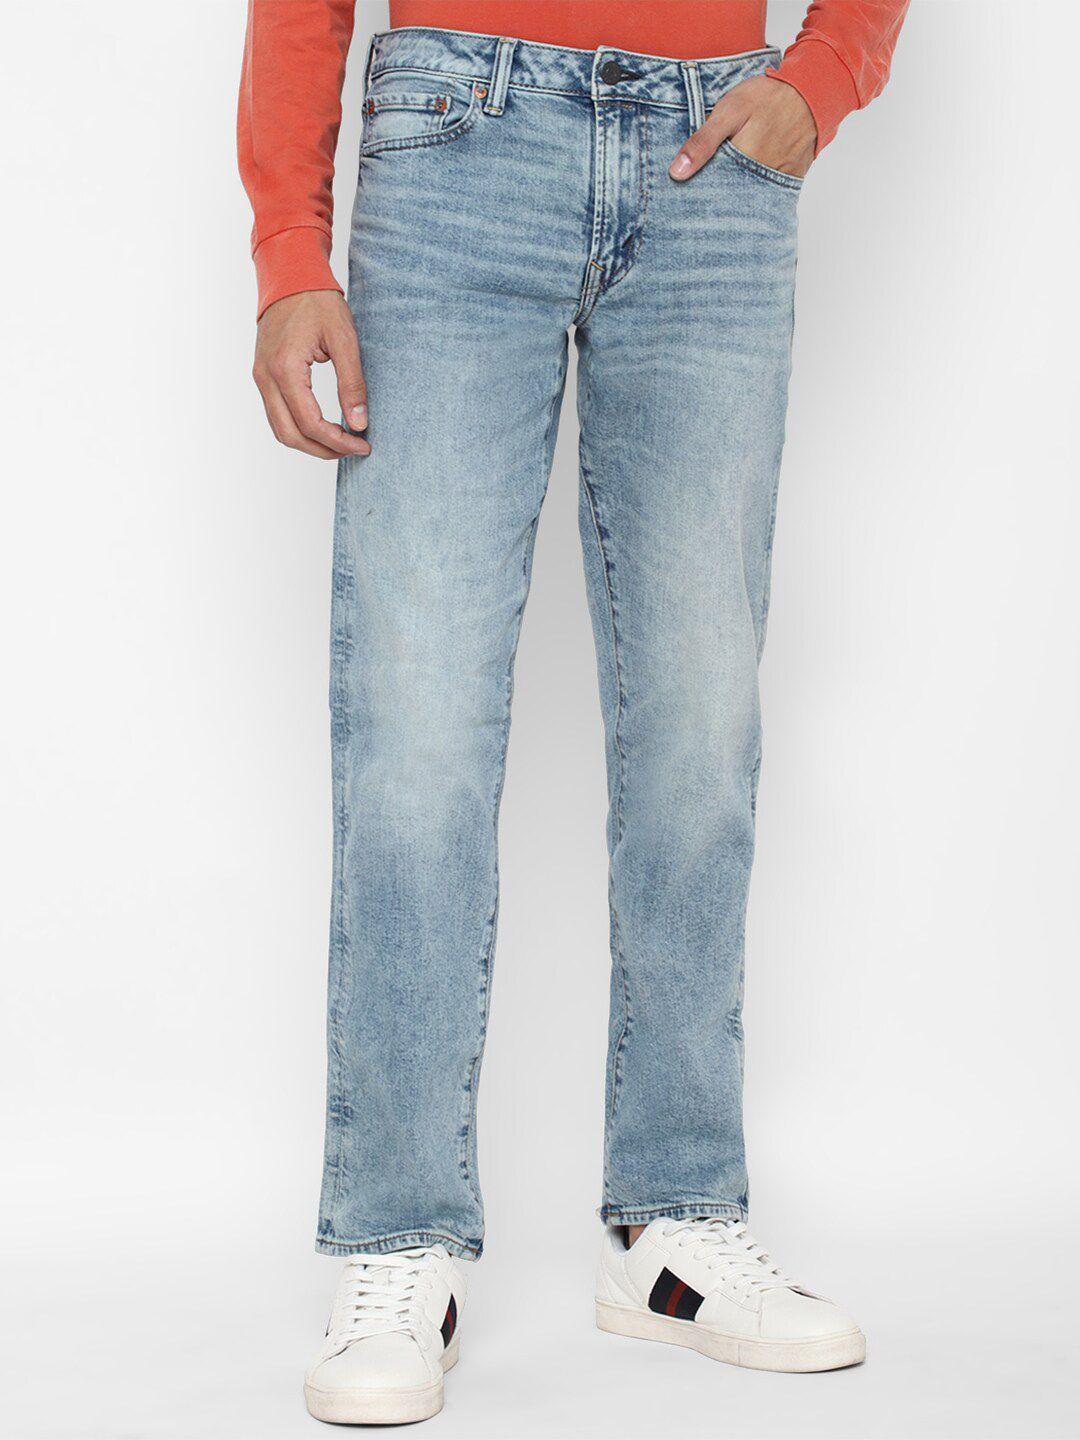 american-eagle-outfitters-men-blue-heavy-fade-jeans